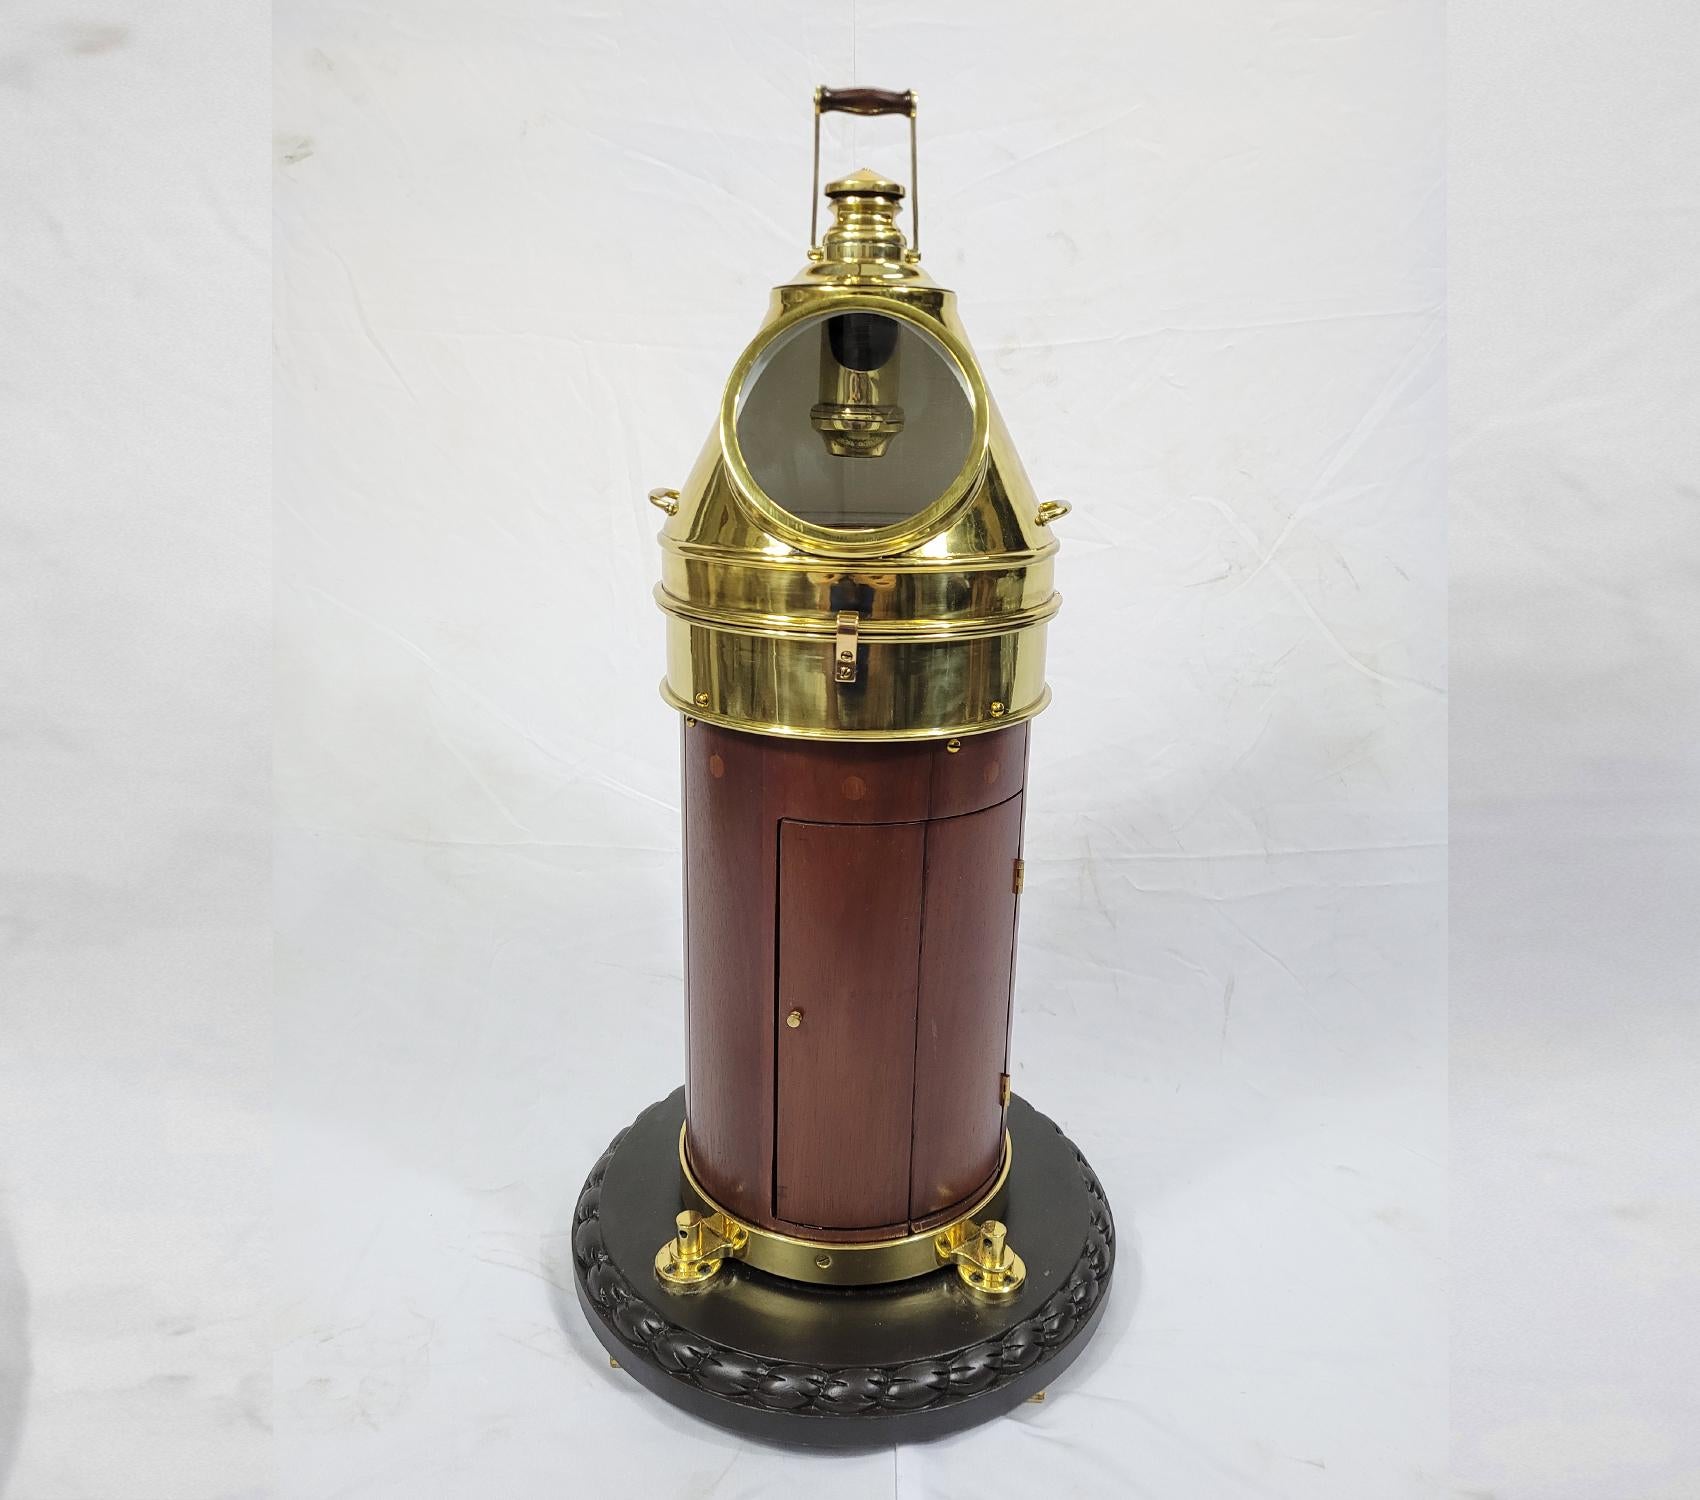 Outstanding boat binnacle. This has been meticulously polished and lacquered. The varnished base has a warm patina. The gimballed compass is engraved E.S. Ritchie and Sons, Boston with serial number 43413. Circa 1935

Made: America
Material: Wood